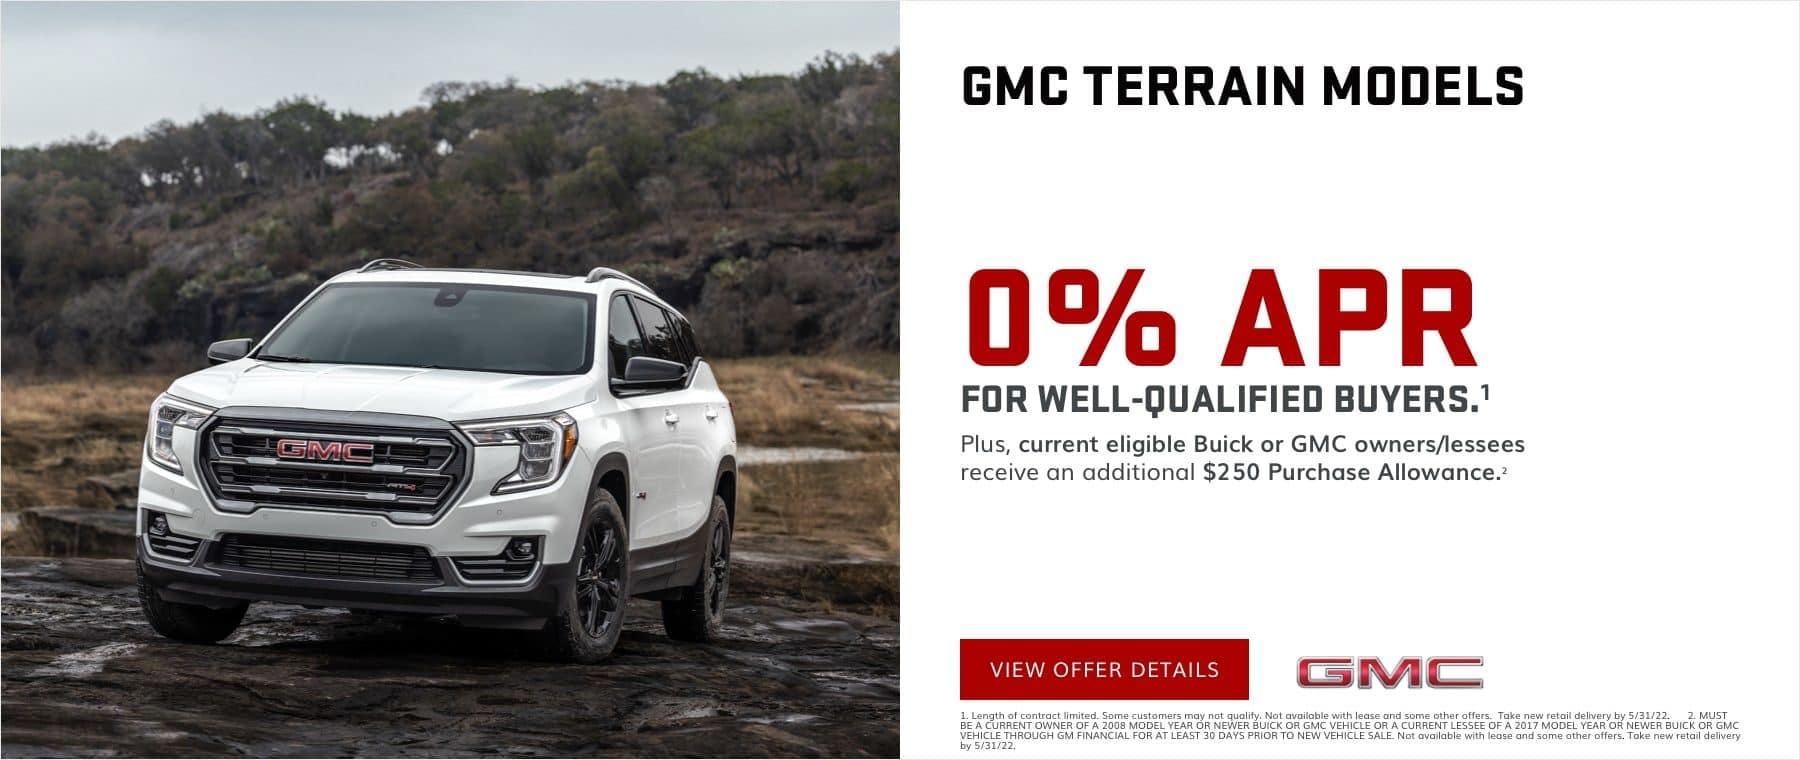 0% APR for well-qualified buyers.1 Plus, current eligible Buick or GMC owners/lessees receive an additional $250 Purchase Allowance.2